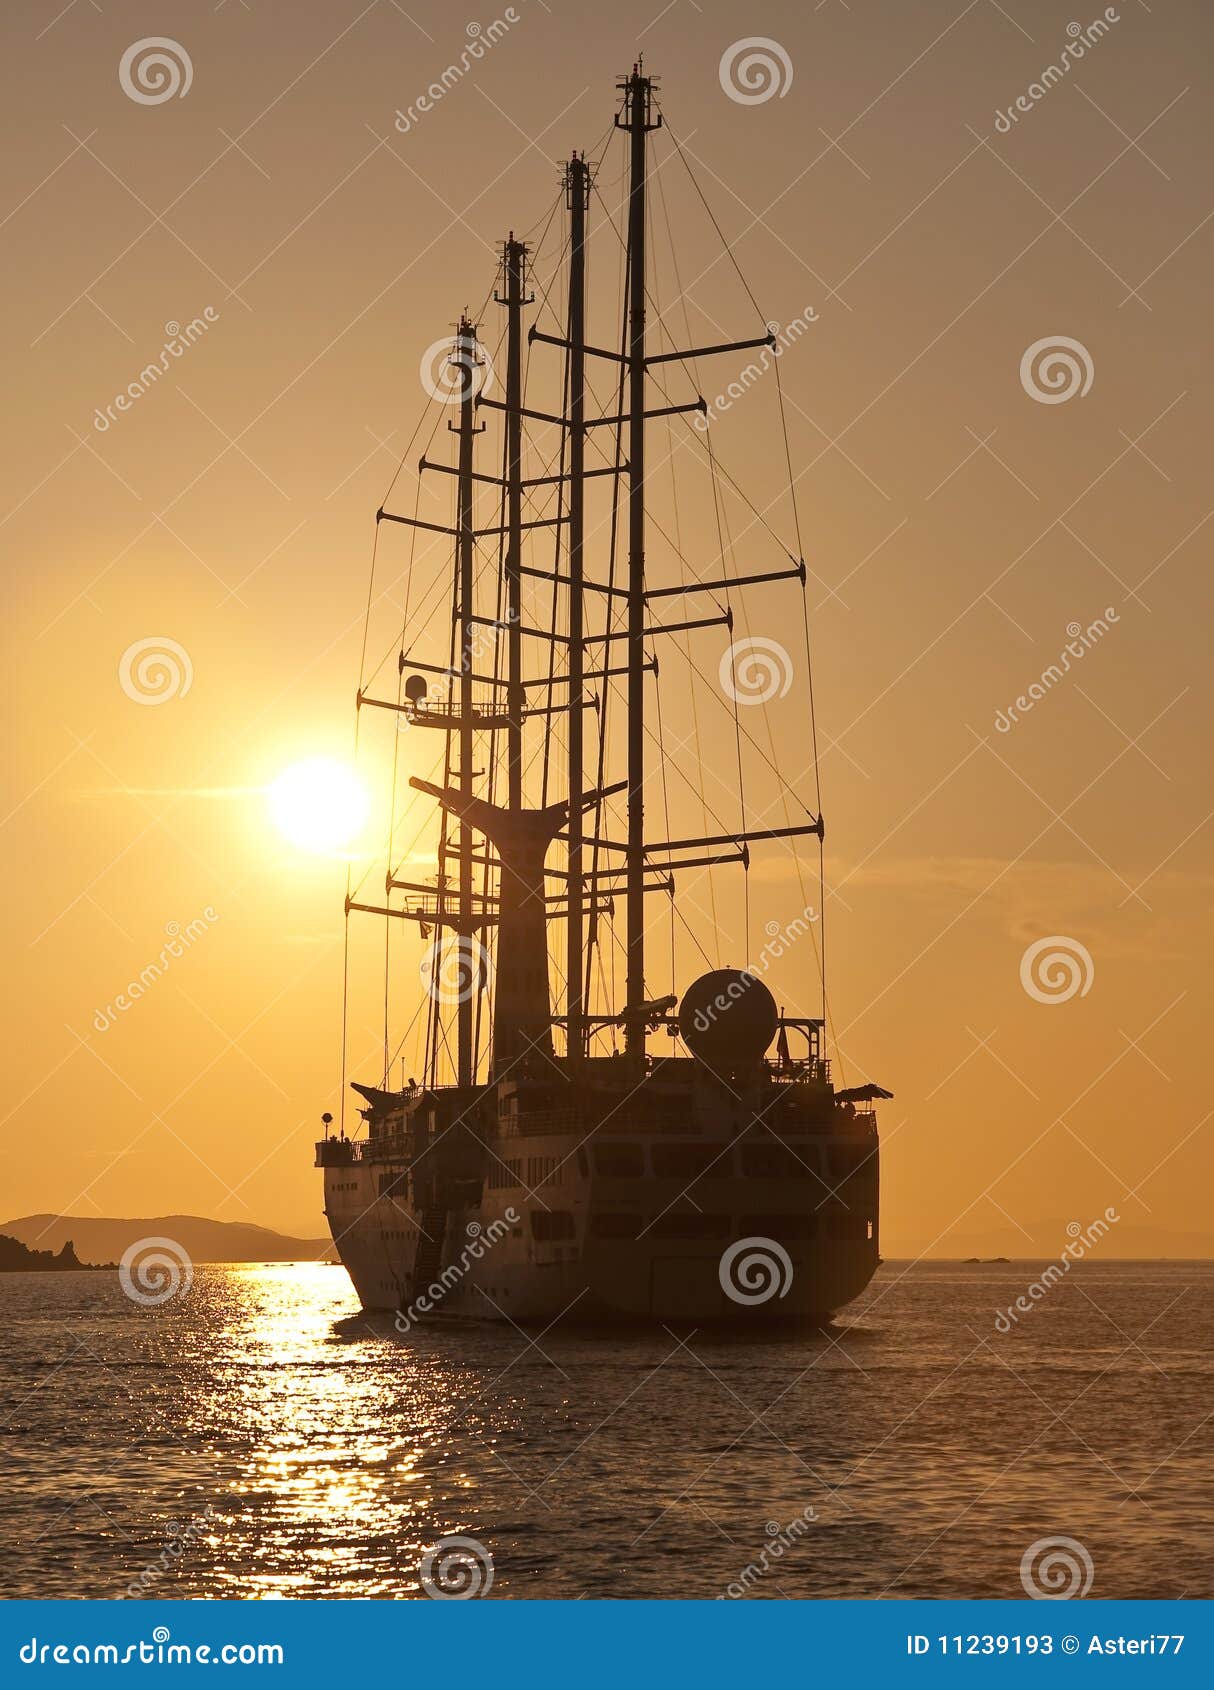 Sailing Yacht For A Romantic Trip At Sunset Stock Photos - Image 